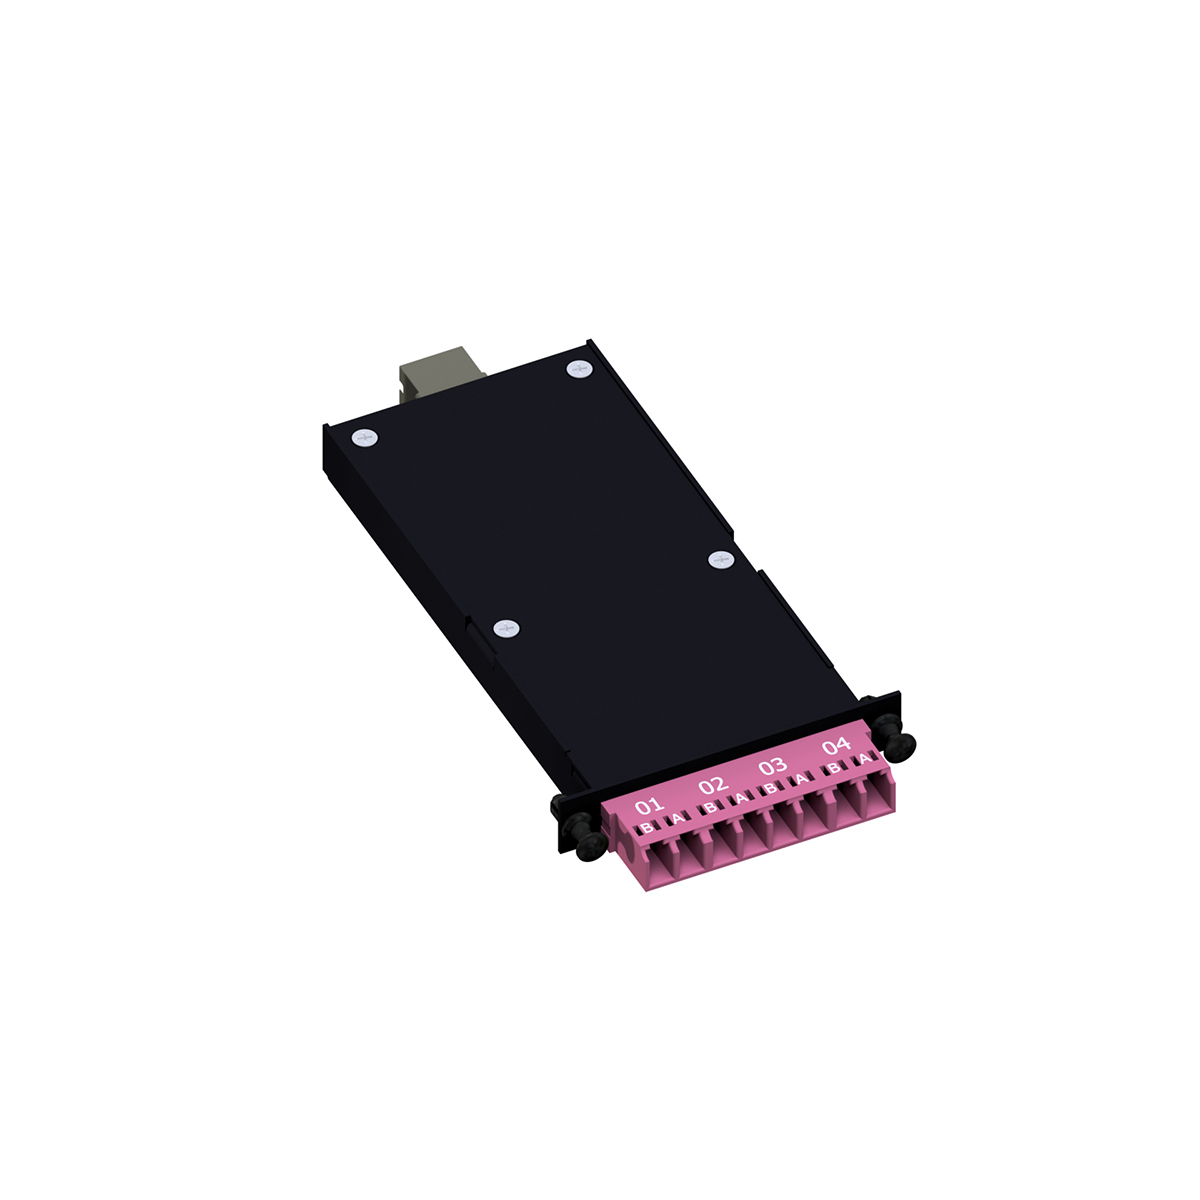 SMAP-G2 HD MTP module cassettes 1/3 HE with 6/6 width partition, 8 fibres, LC-Duplex / MTP OCTO multimode fitting for PreCONNECT® OCTO trunks